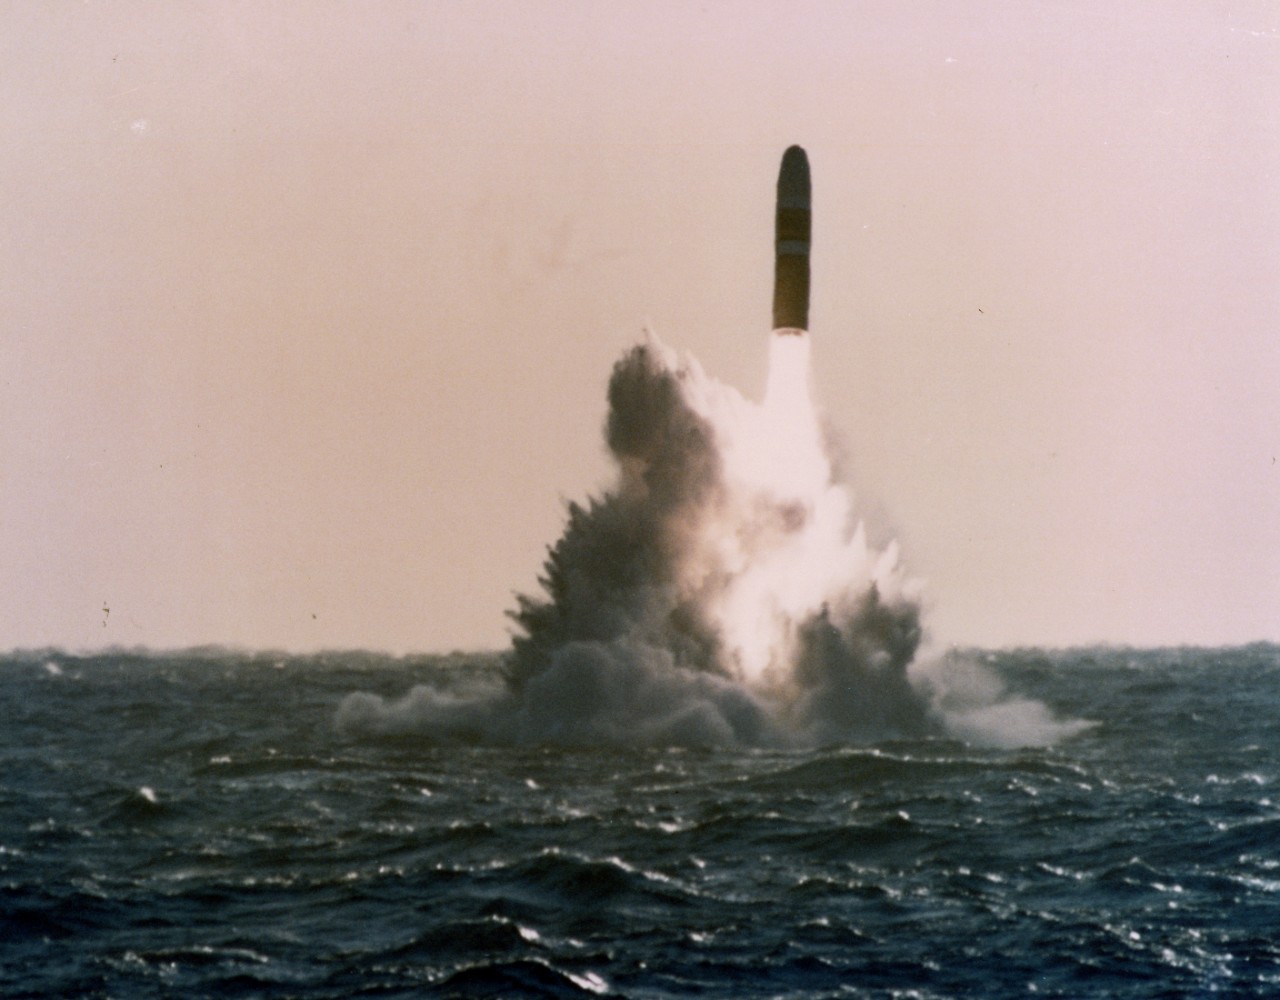 Missile breaks through surface of the sea